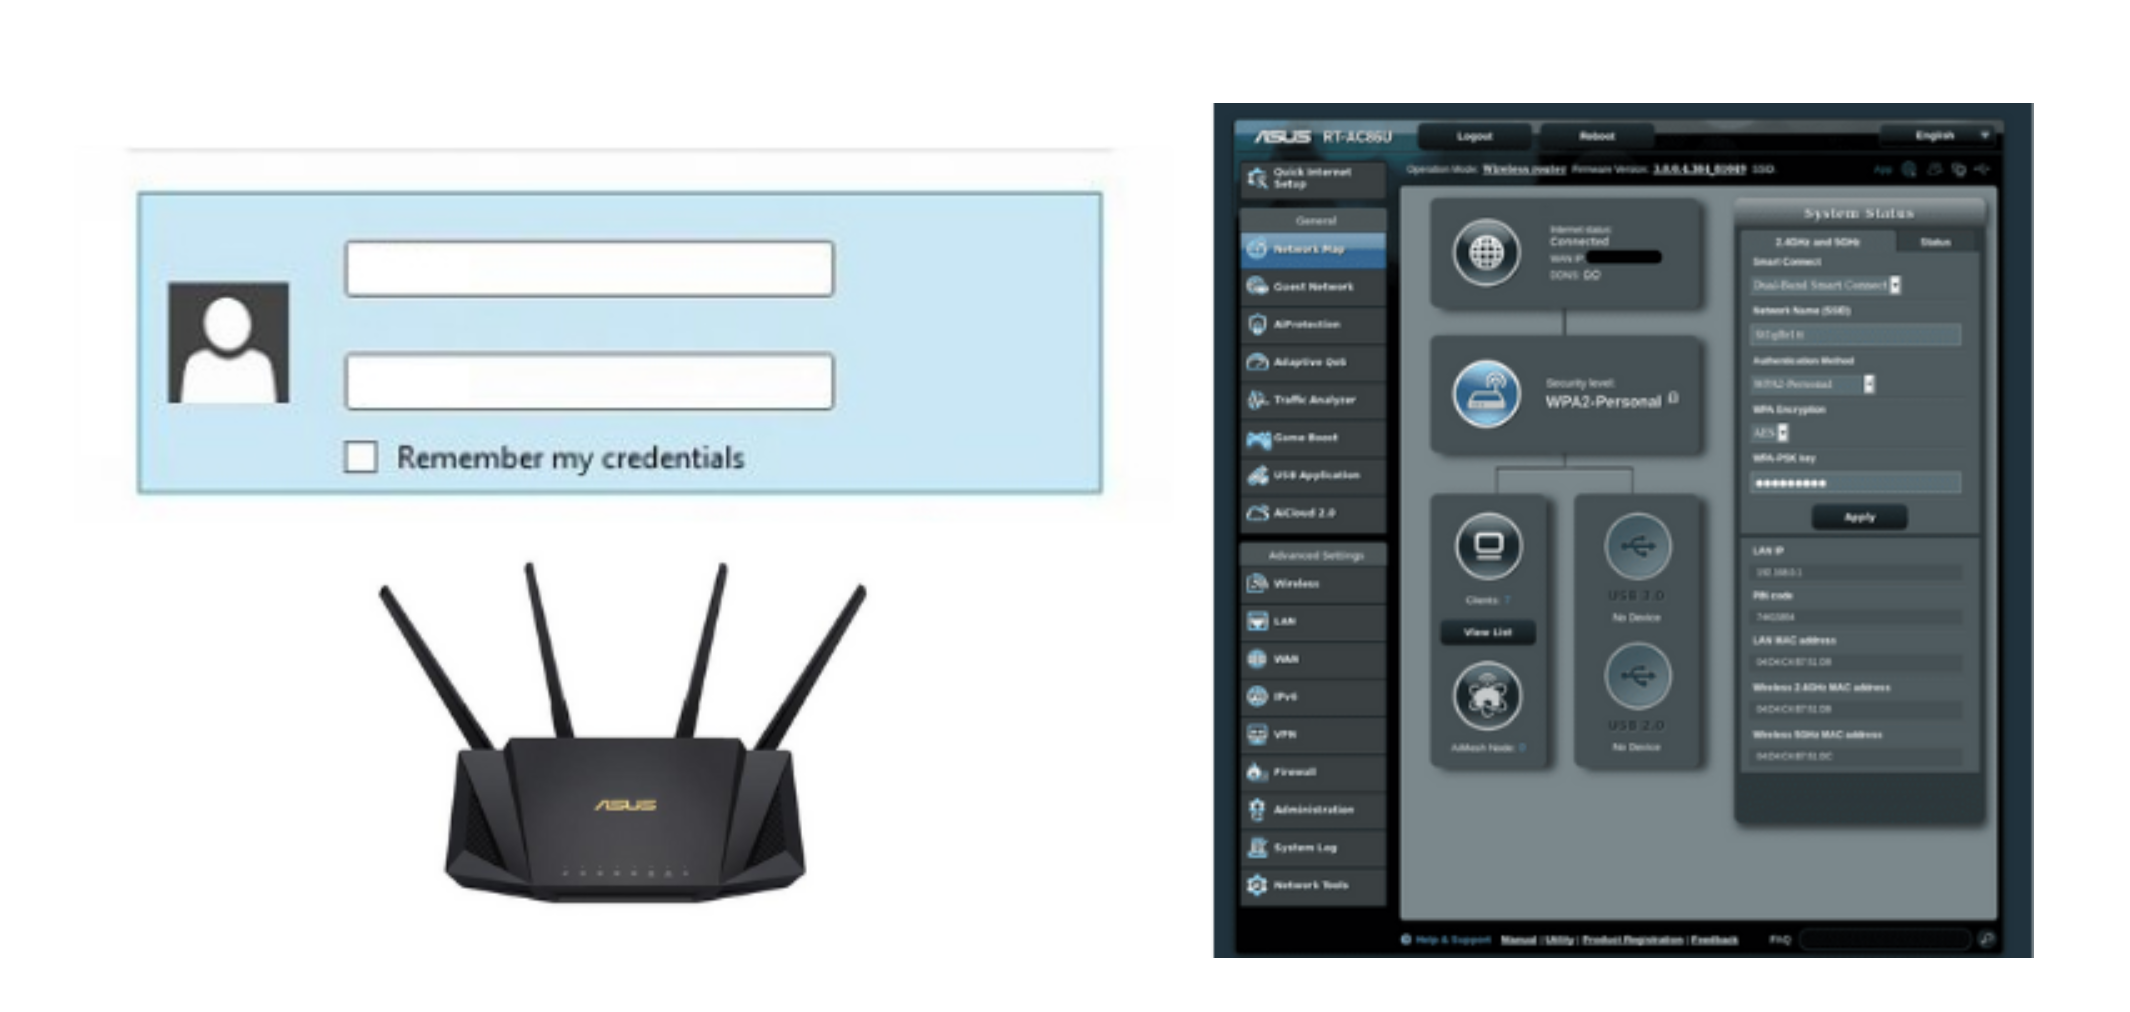 Login Asus Router - How to Log in to an ASUS Router